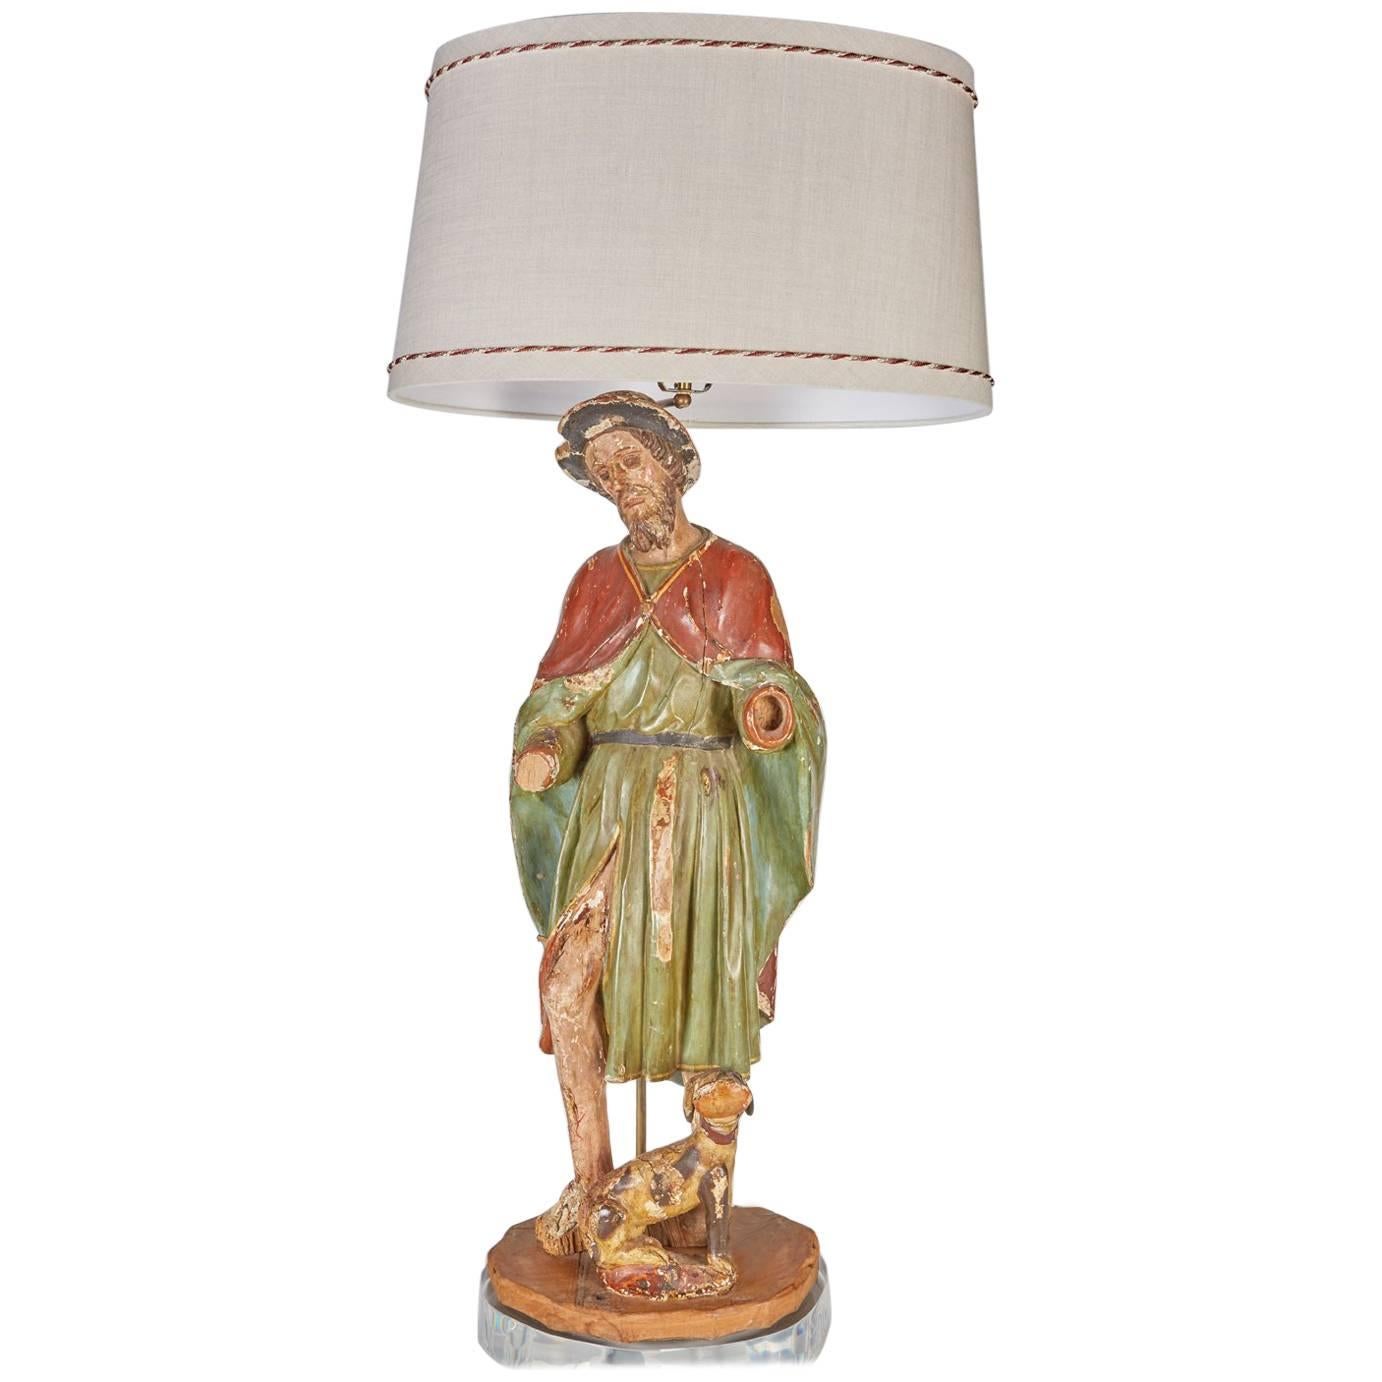 Large Antique Santos of St. Roche, Patron Saint of Dogs, Now Mounted as a Lamp